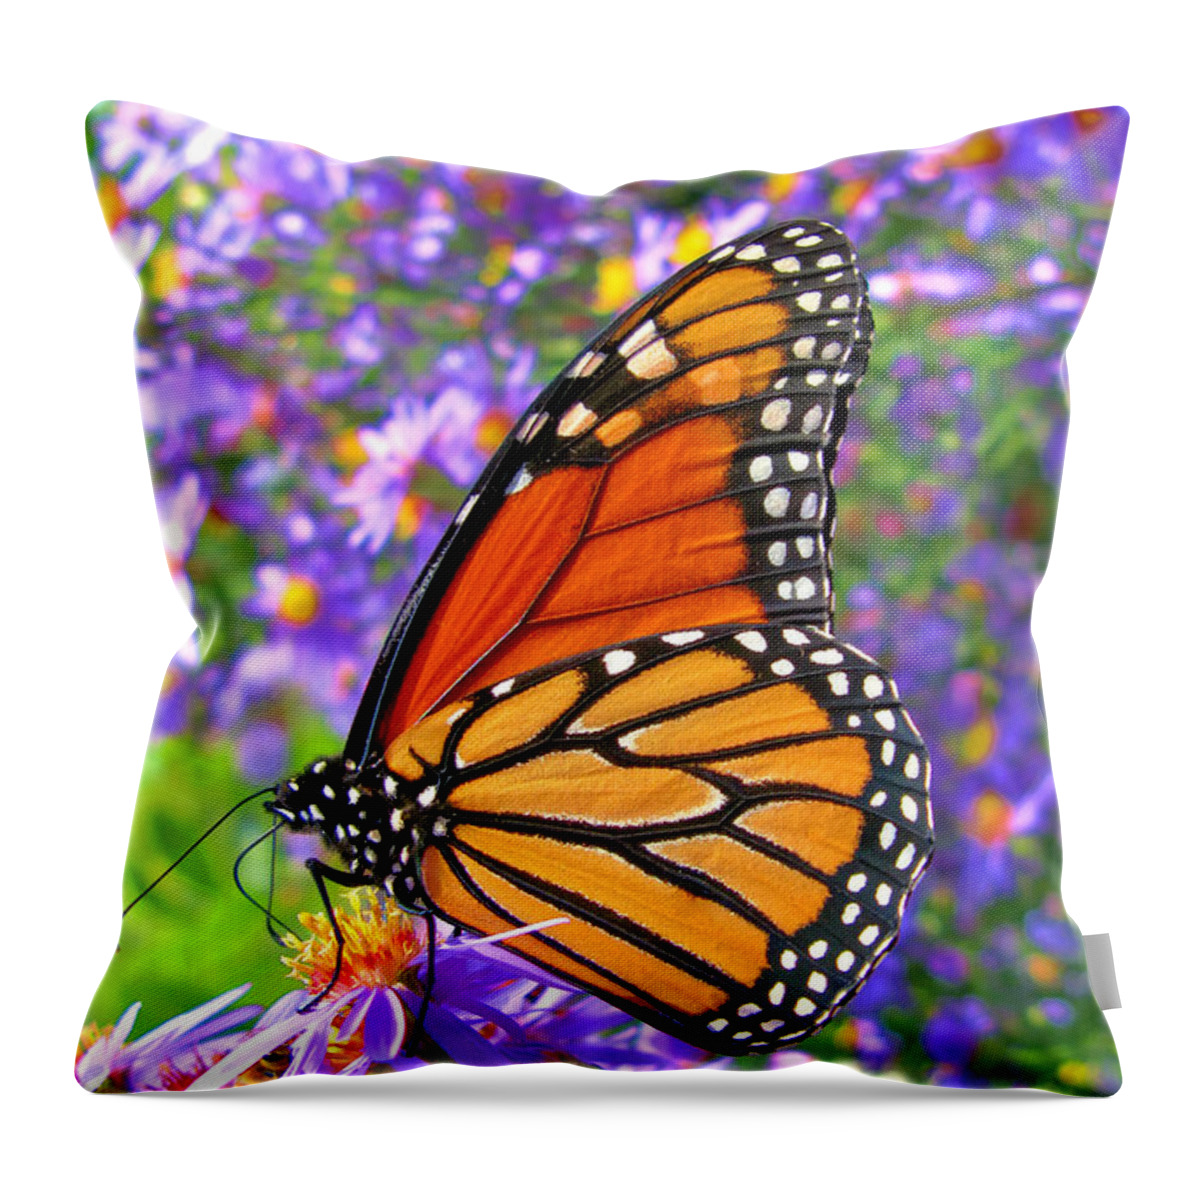 Butterfly Throw Pillow featuring the photograph Monarch Butterfly by Olivier Le Queinec